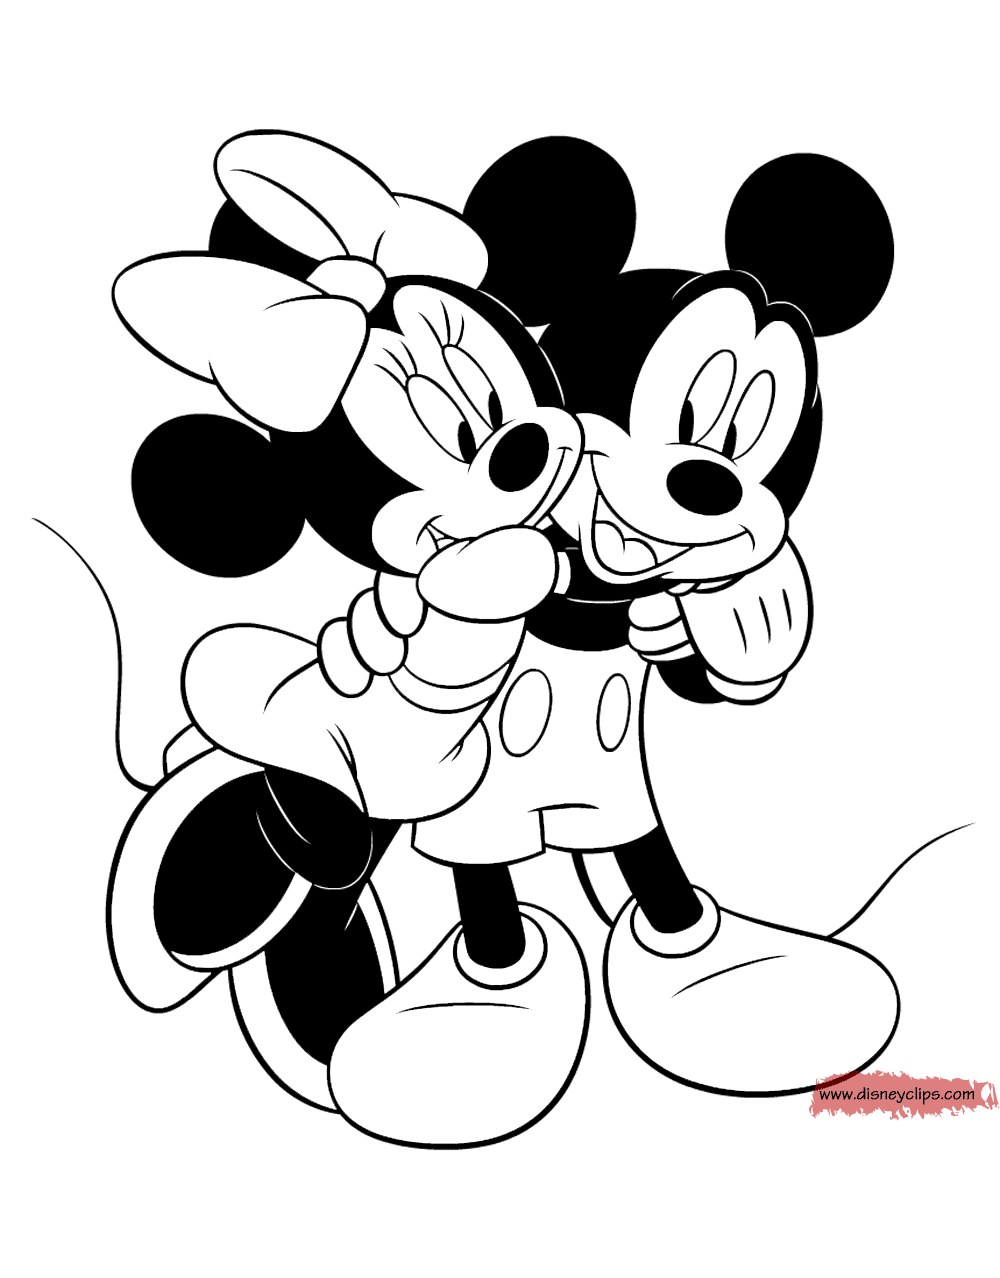 coloring page Mickey Minnie hugging